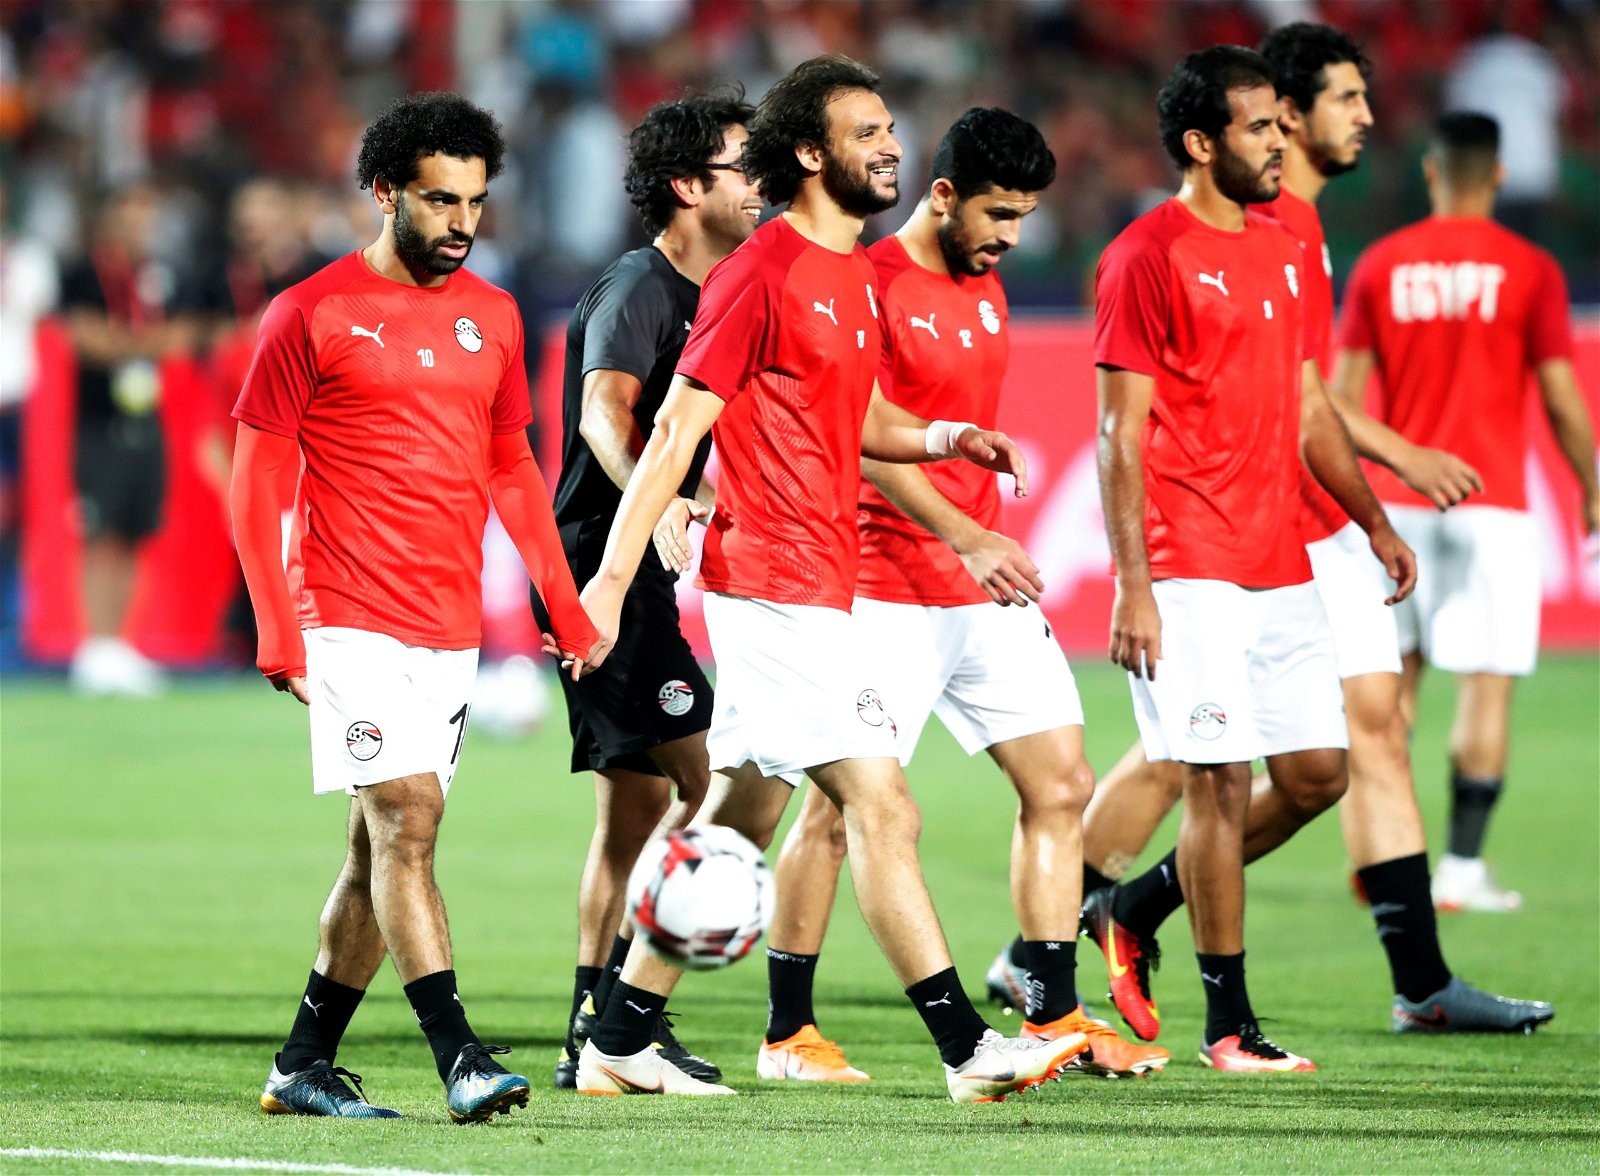 Egypt Africa Cup of Nations squad 2021